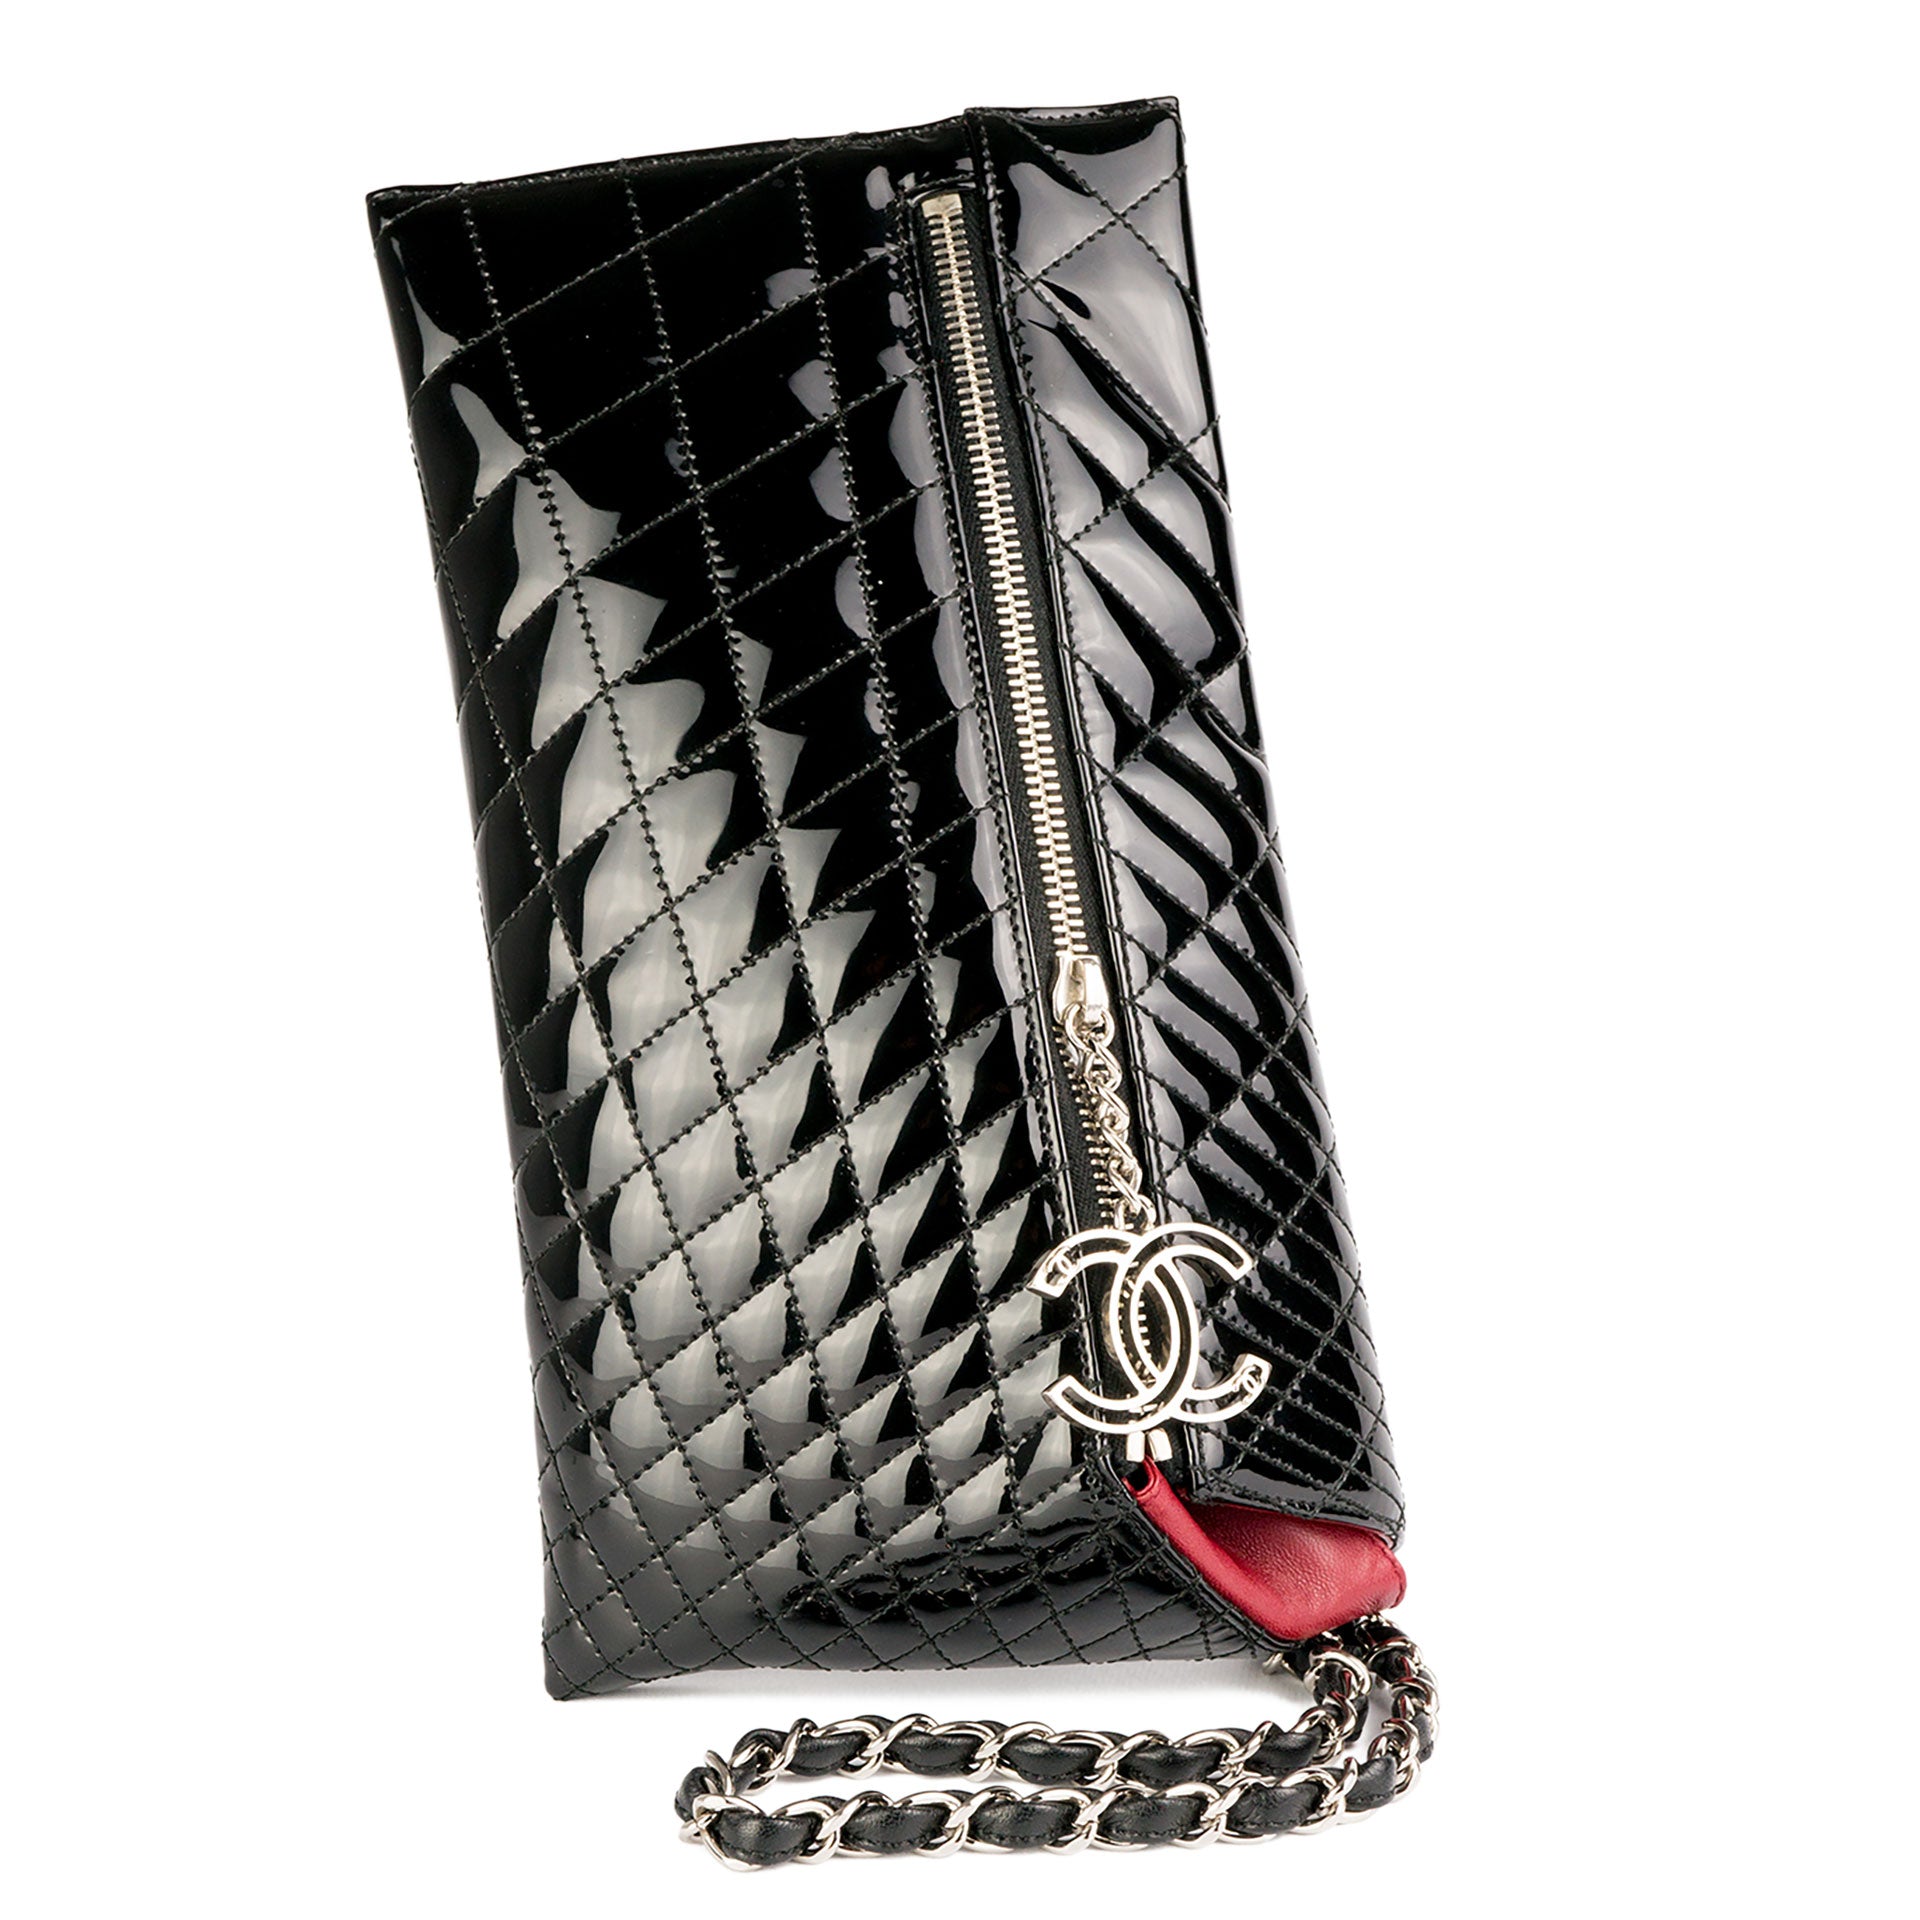 Chanel CC Charm Quilted Lambskin Patent Leather Bag